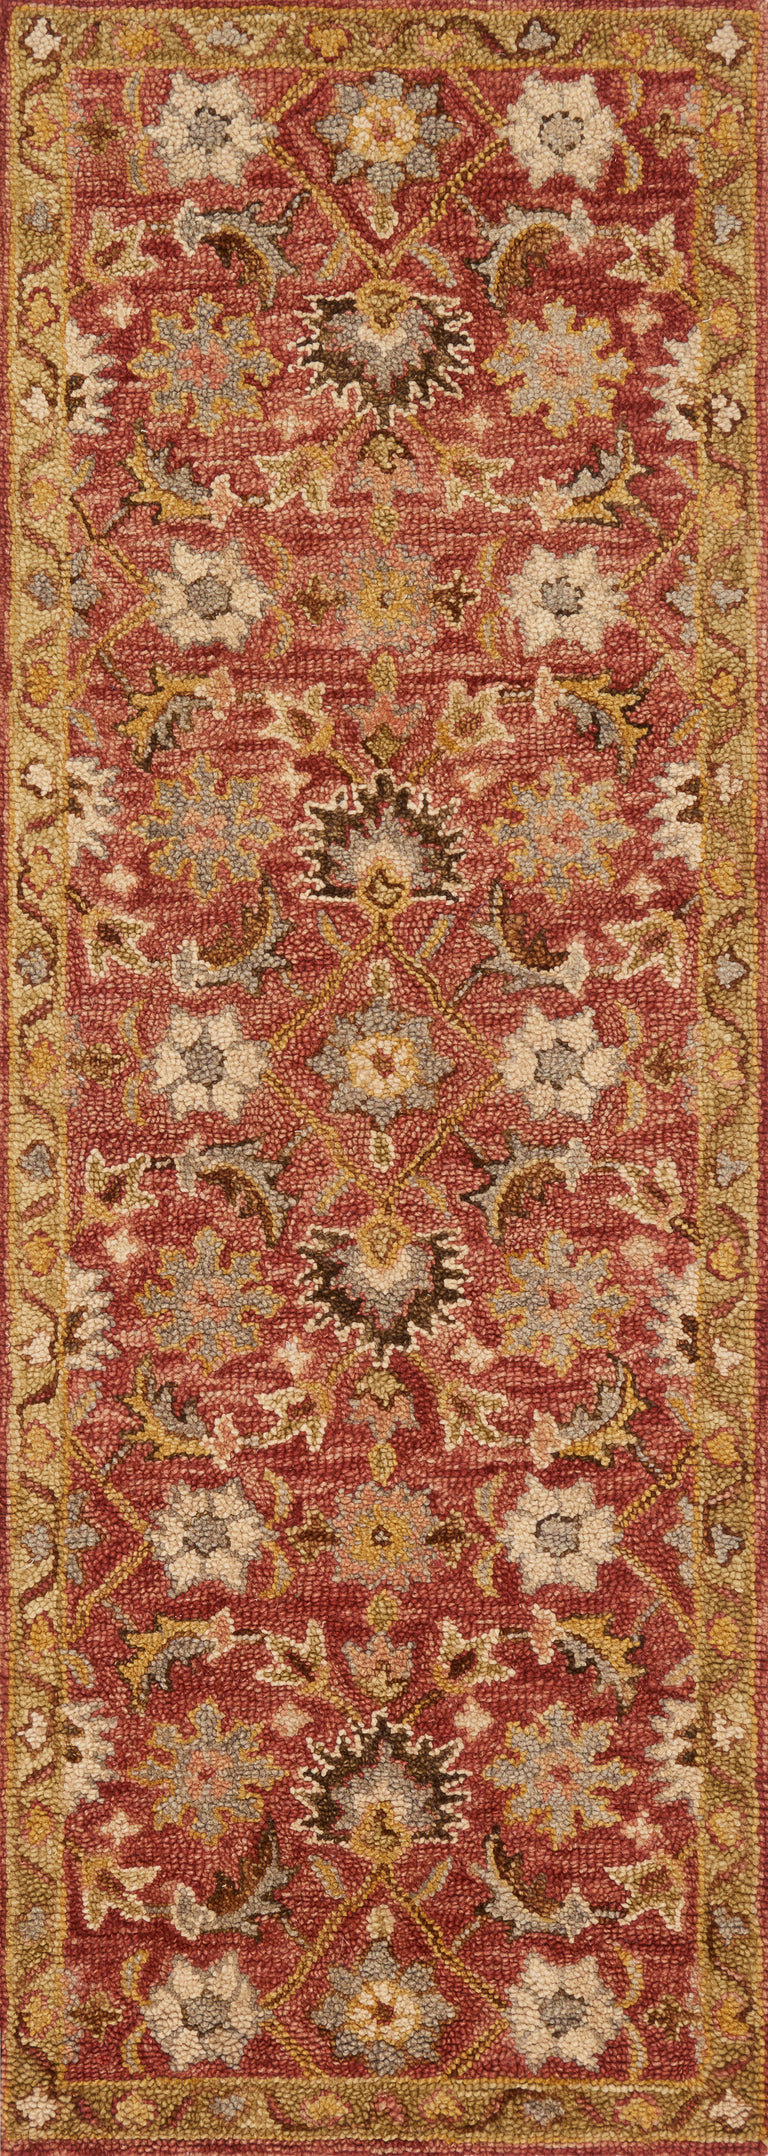 Loloi Rugs Victoria Collection Rug in Terracotta, Gold - 9'3" x 13'